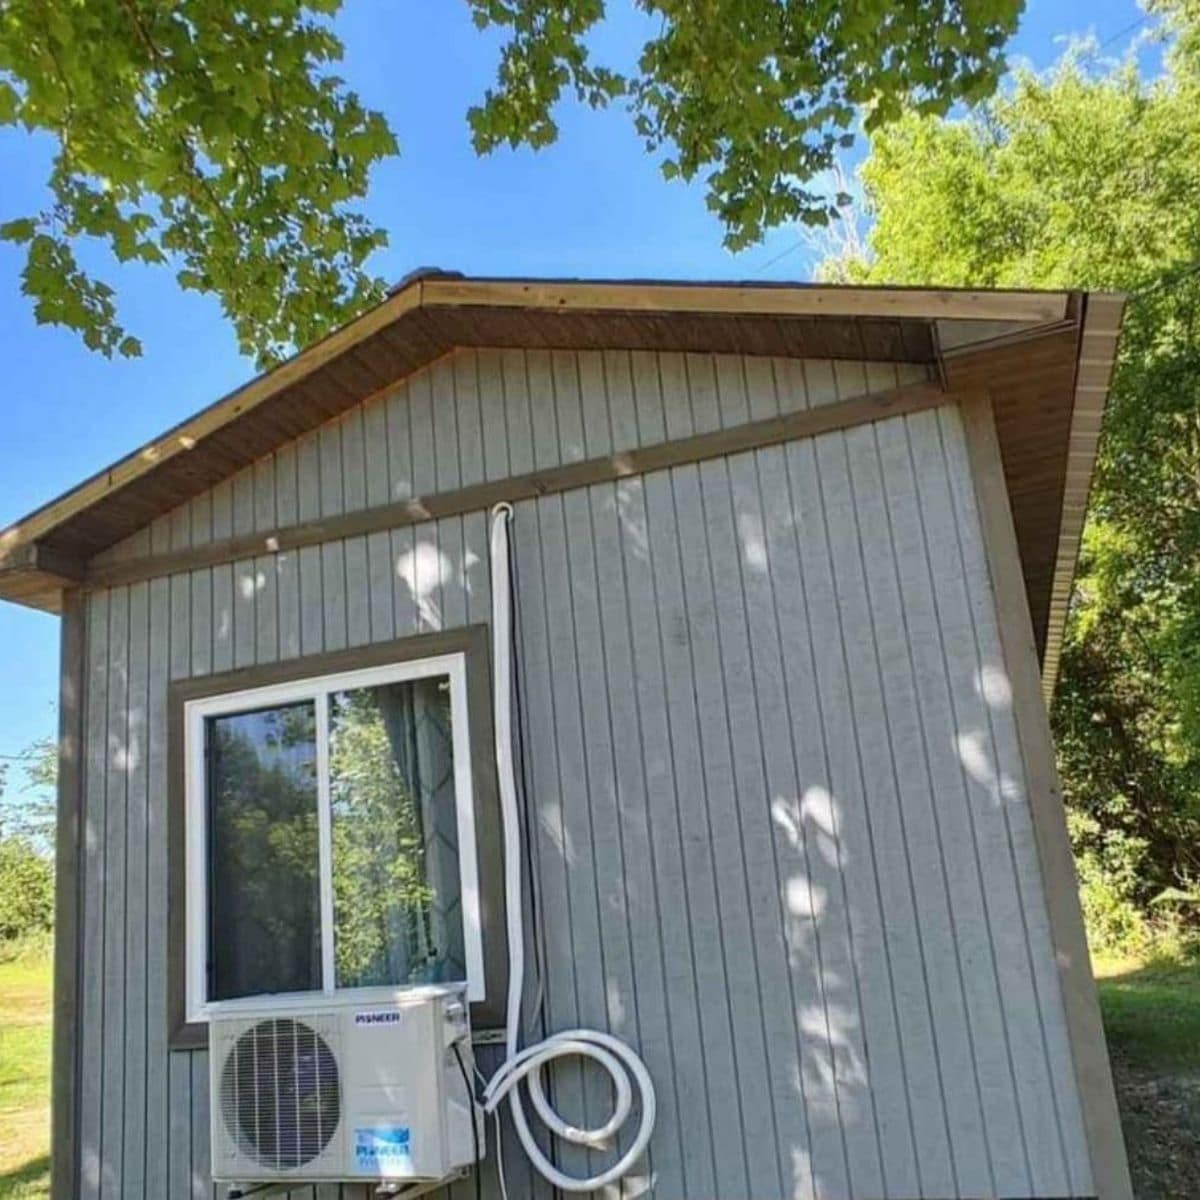 end of tiny home with air conditioner mounted below window